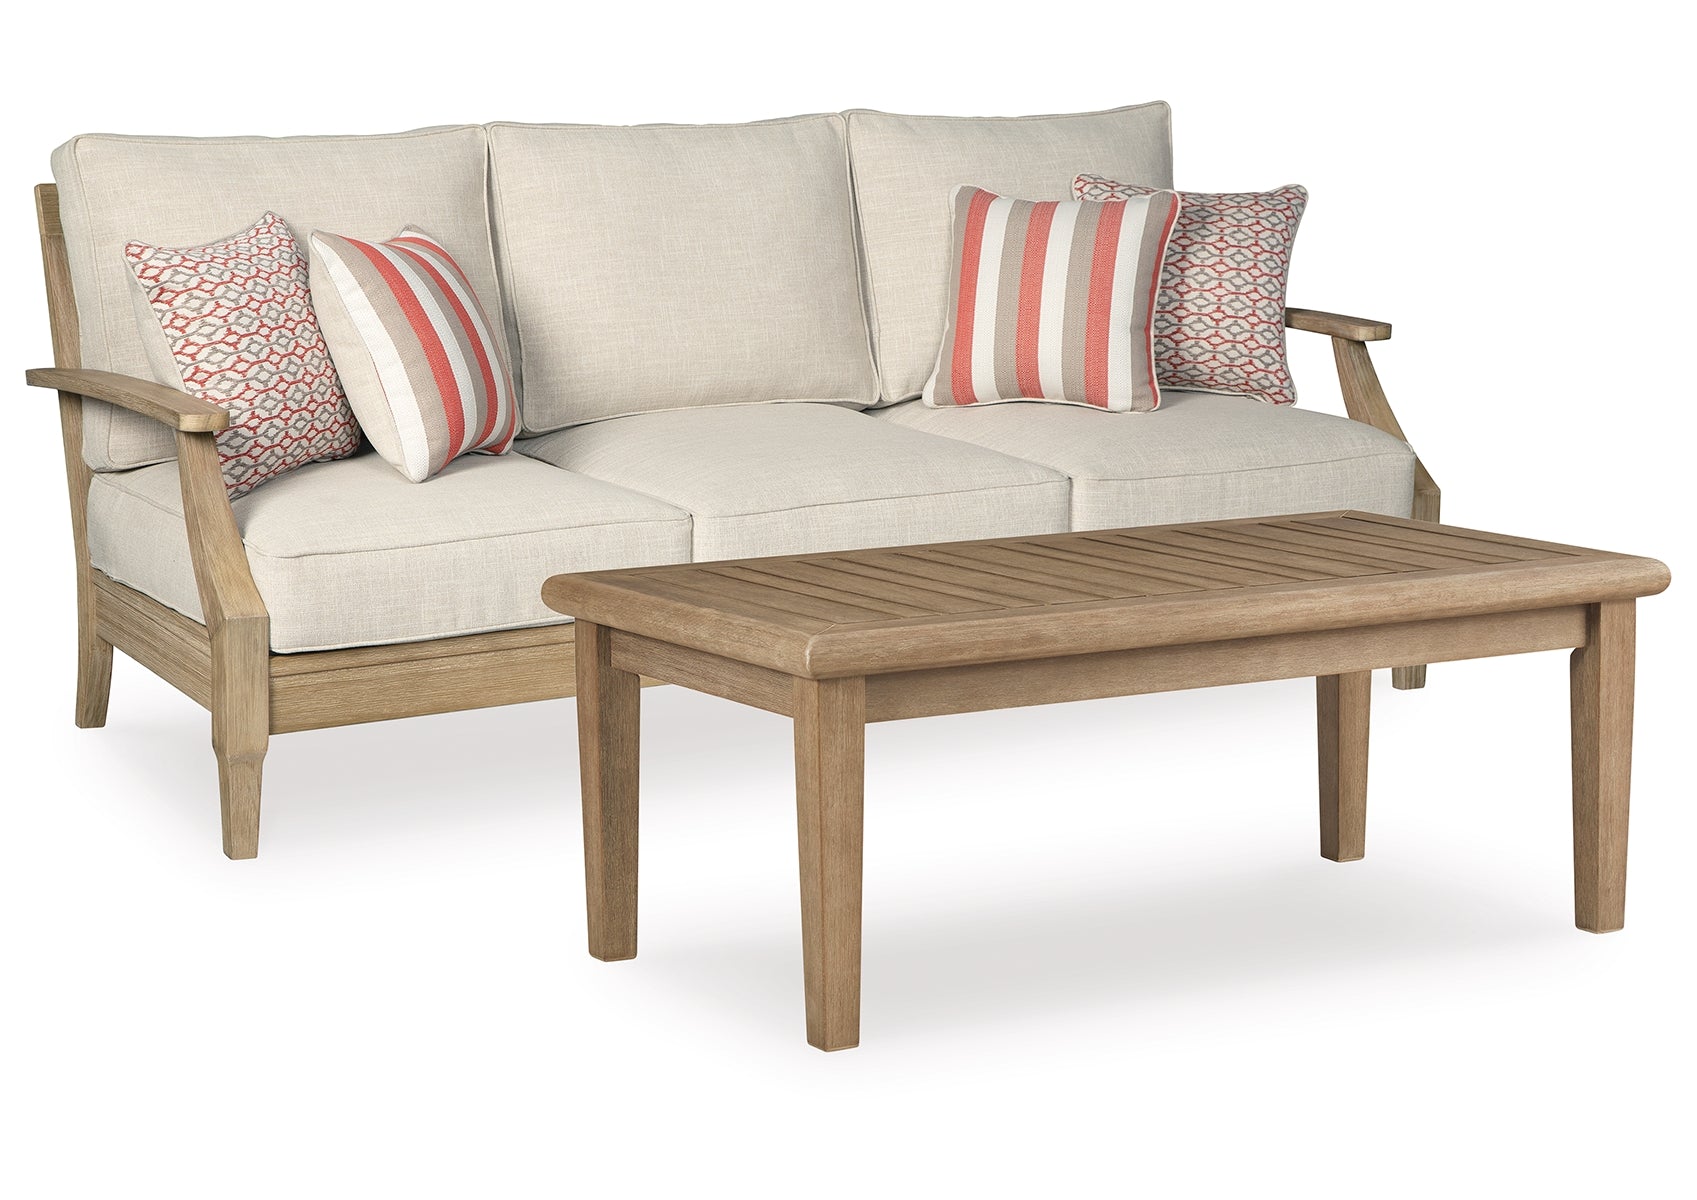 Clare View Outdoor Sofa with Coffee Table